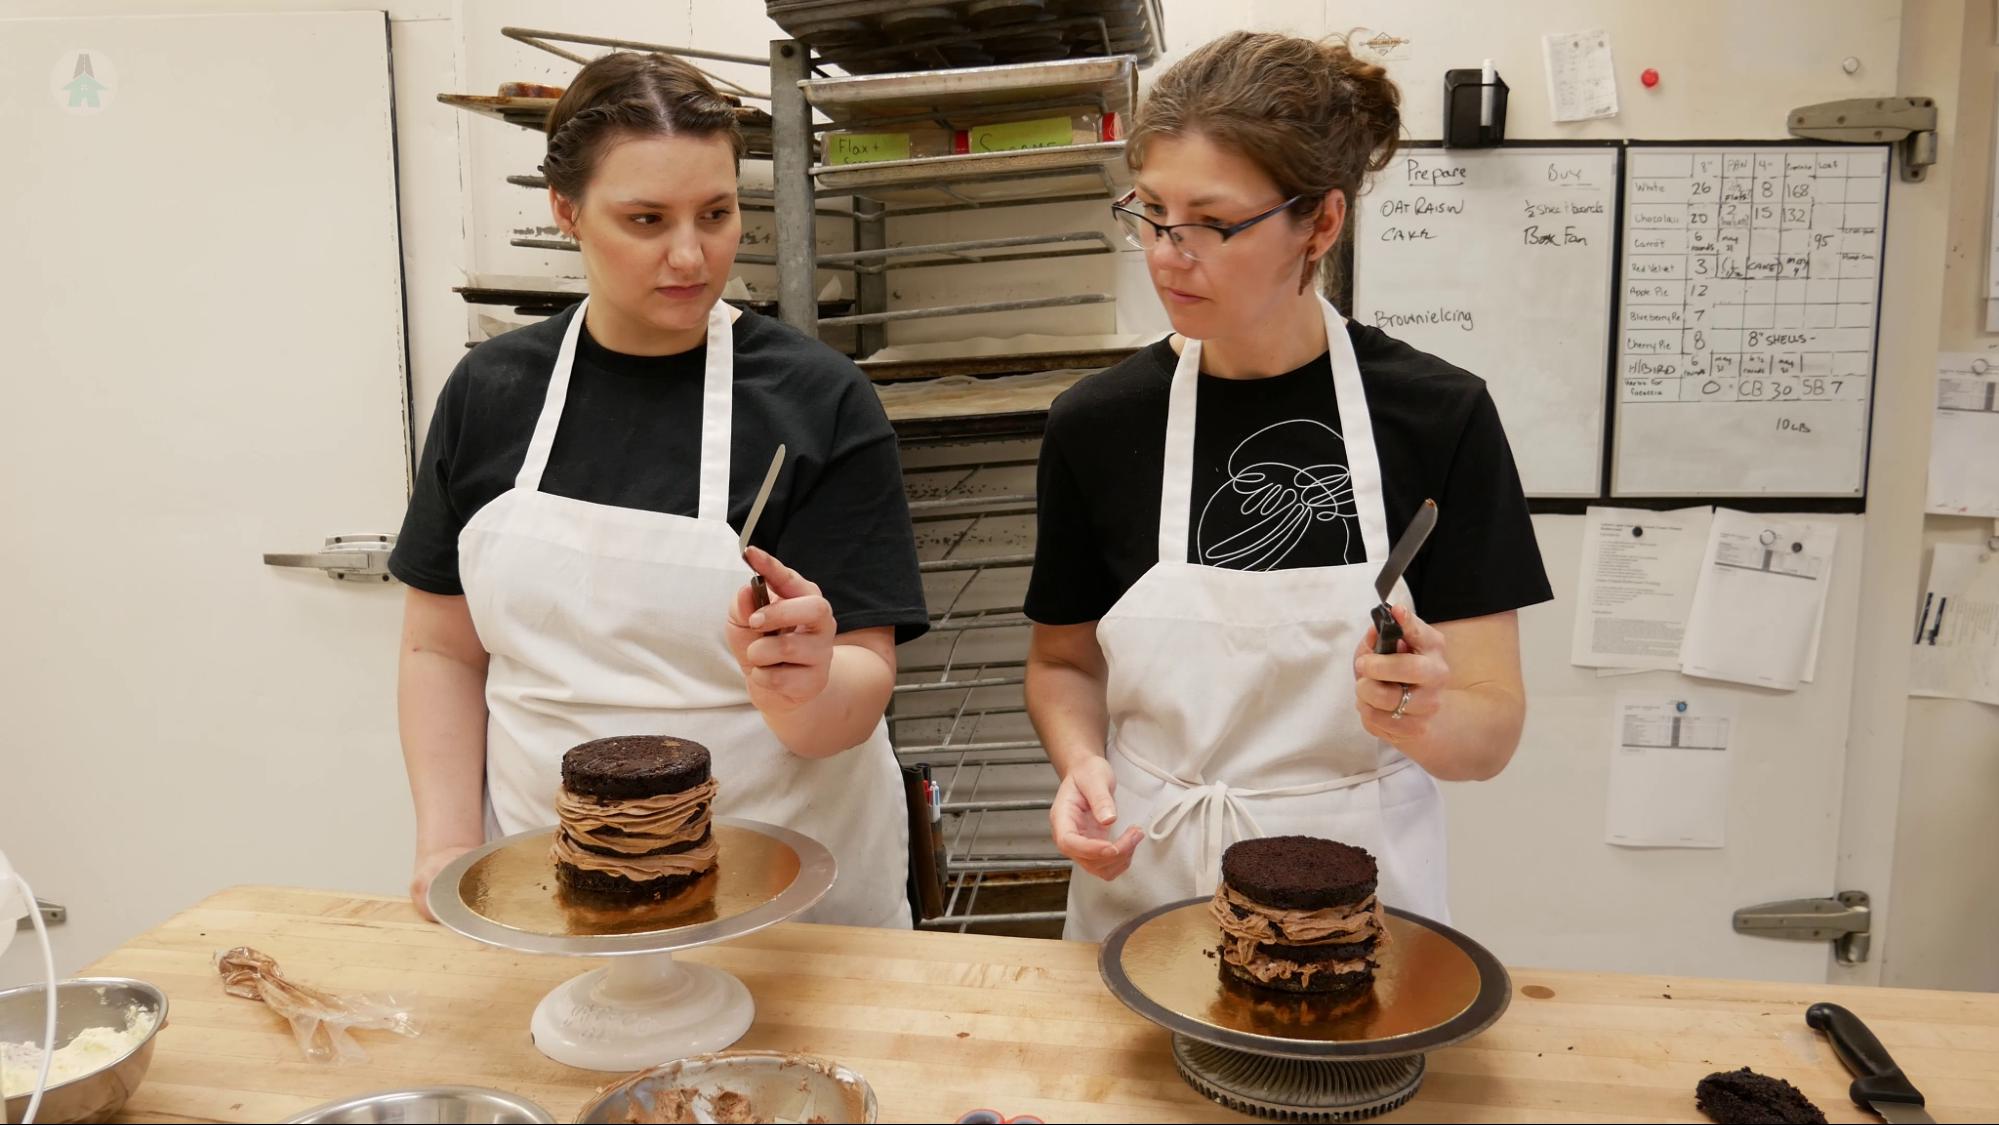 Cara shows Mel how to hold a cake spatula for icing a cake.